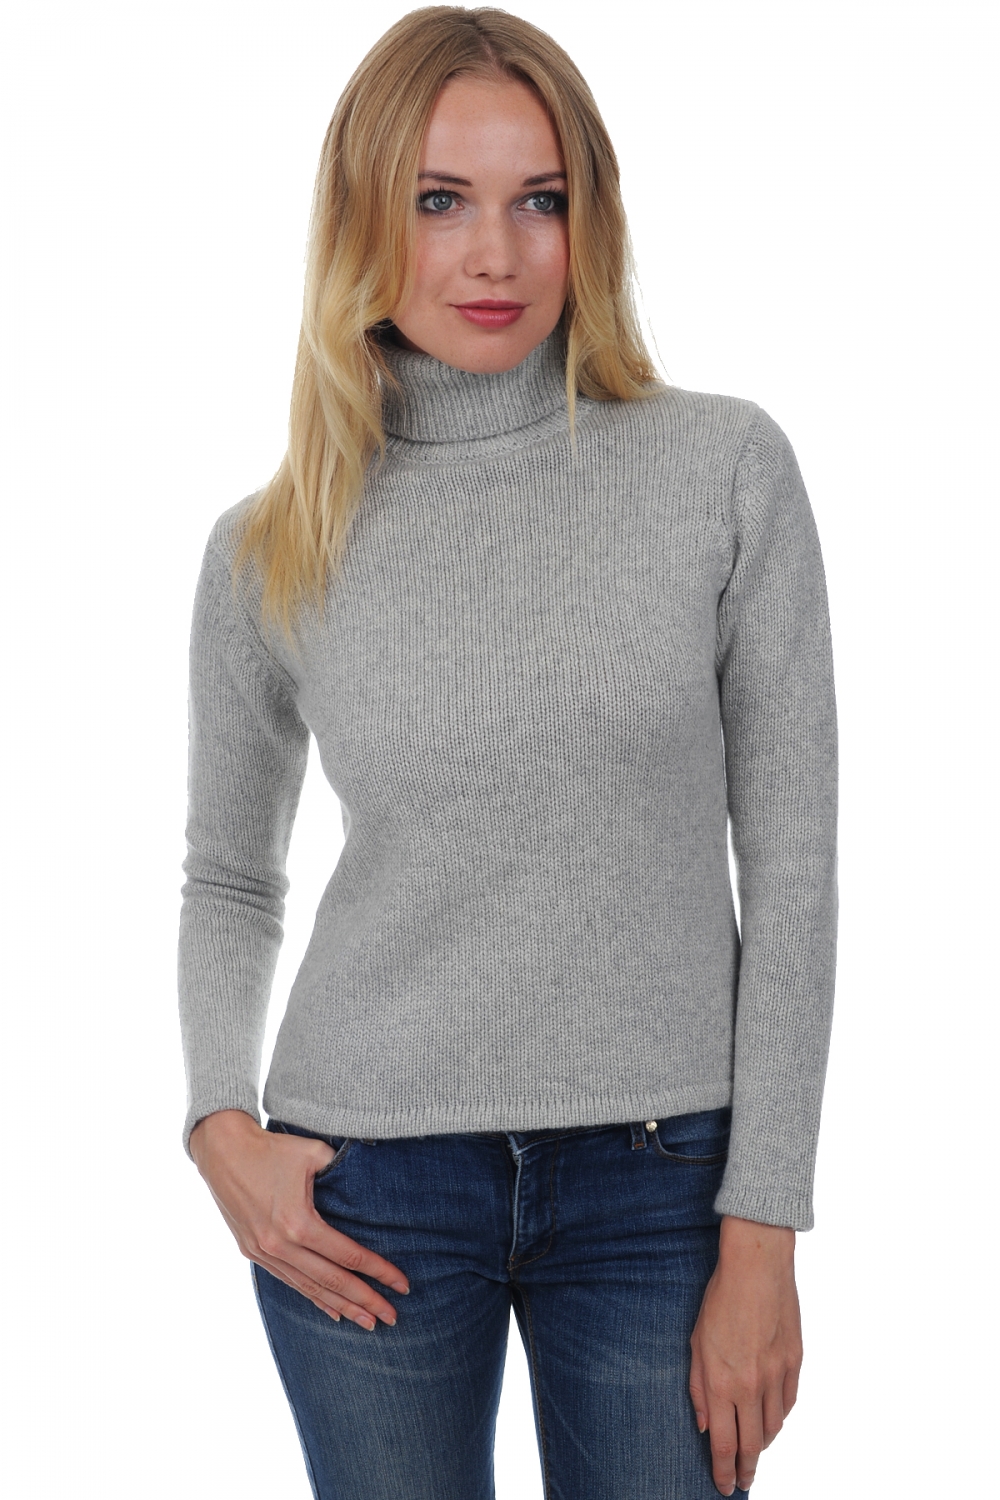 Cashmere ladies timeless classics carla flanelle chine 3xl